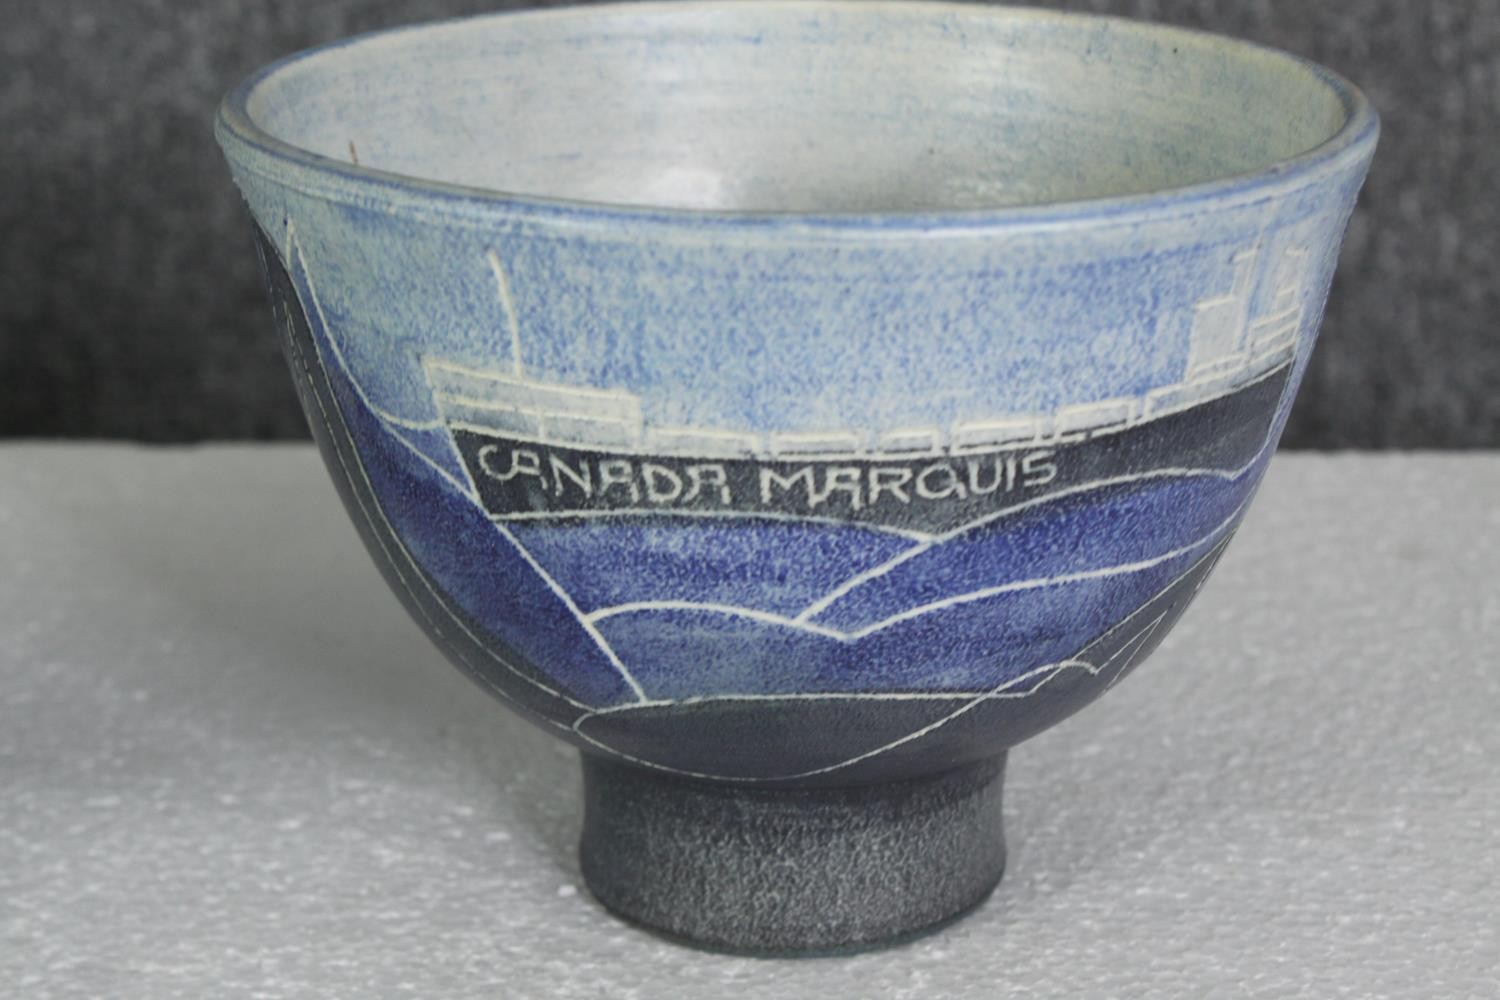 A pair of commemorative glazed earthenware bowls depicting the freight ship 'Canada Marquis', signed - Bild 3 aus 4